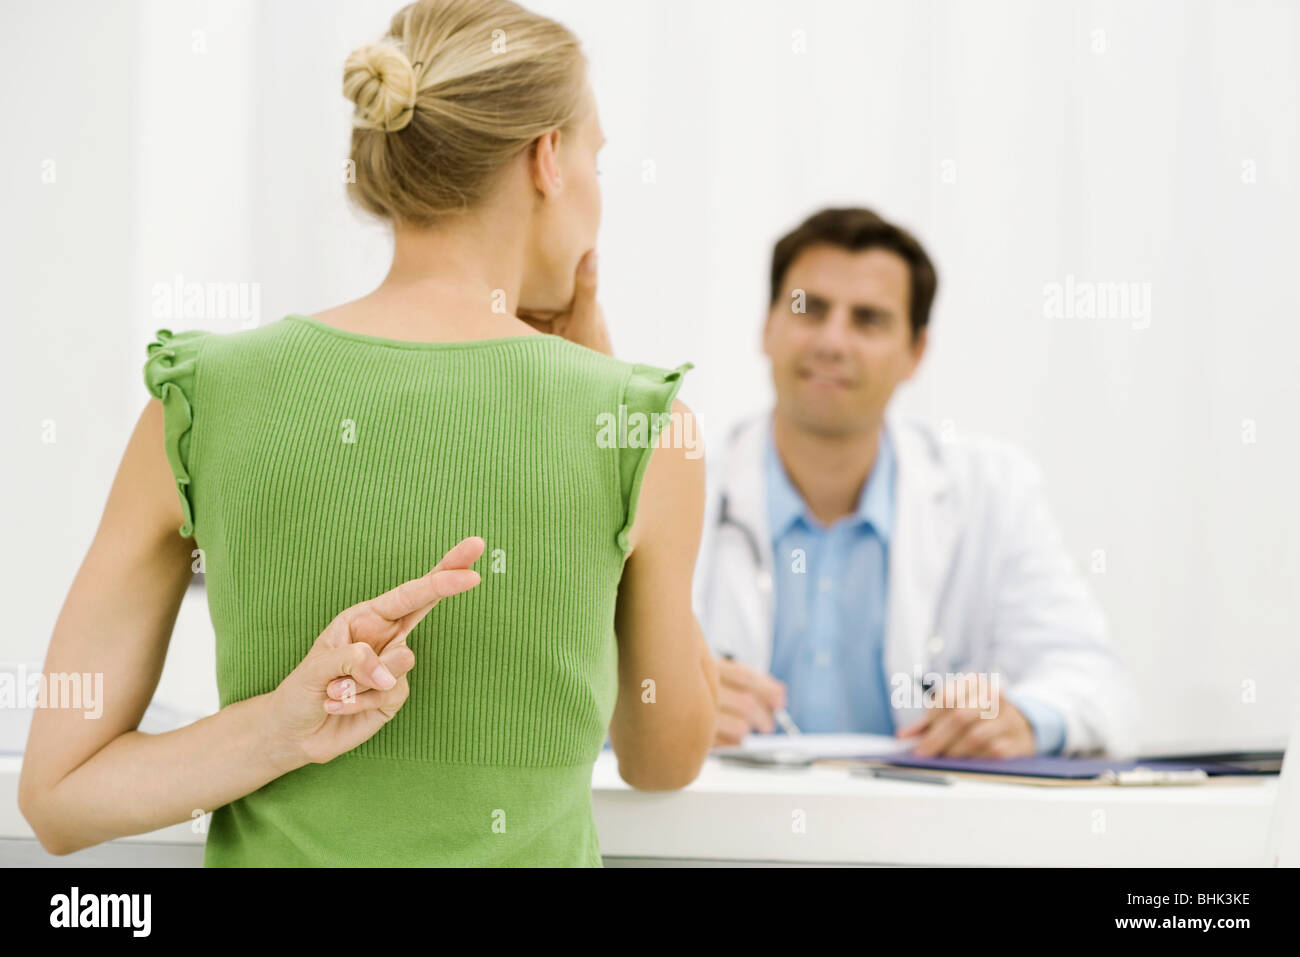 Female patient with hand behind back crossing fingers, speaking with doctor Stock Photo